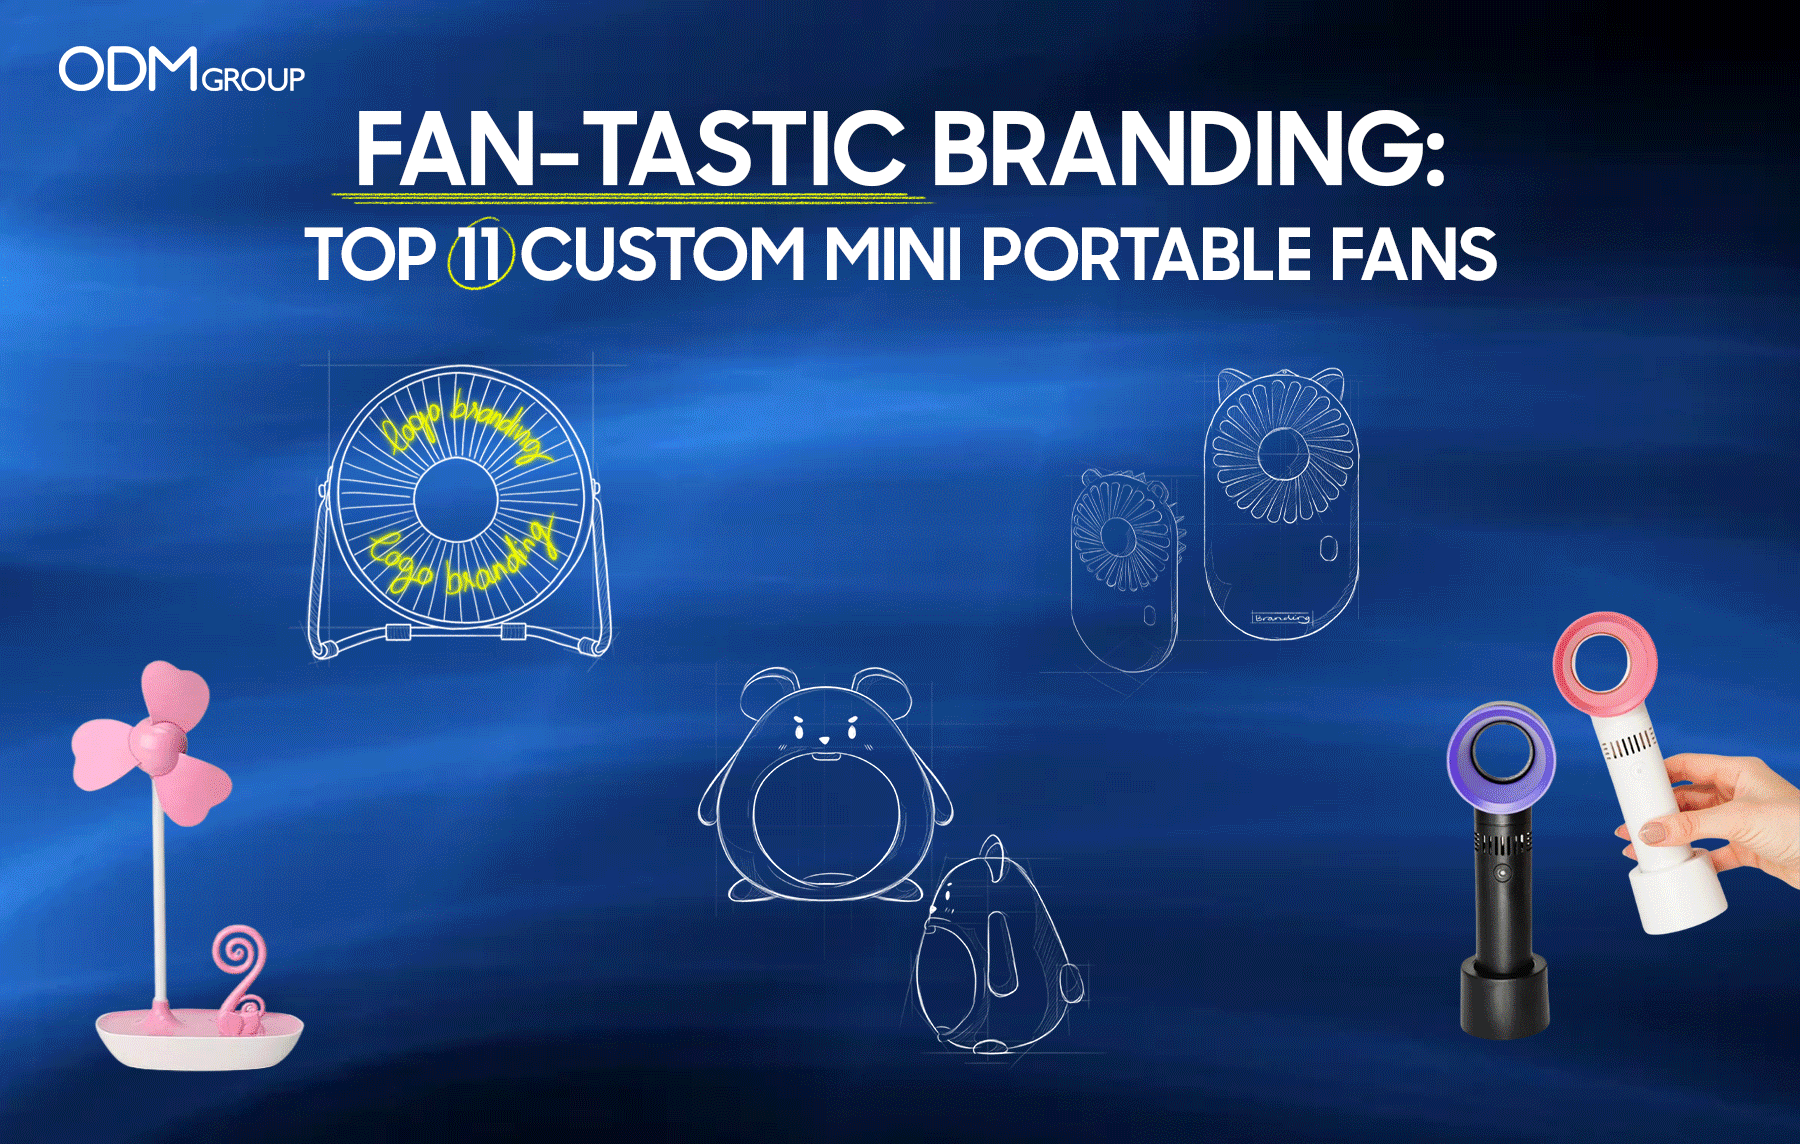 Various custom mini portable fans in different designs - Best gifts for coworkers